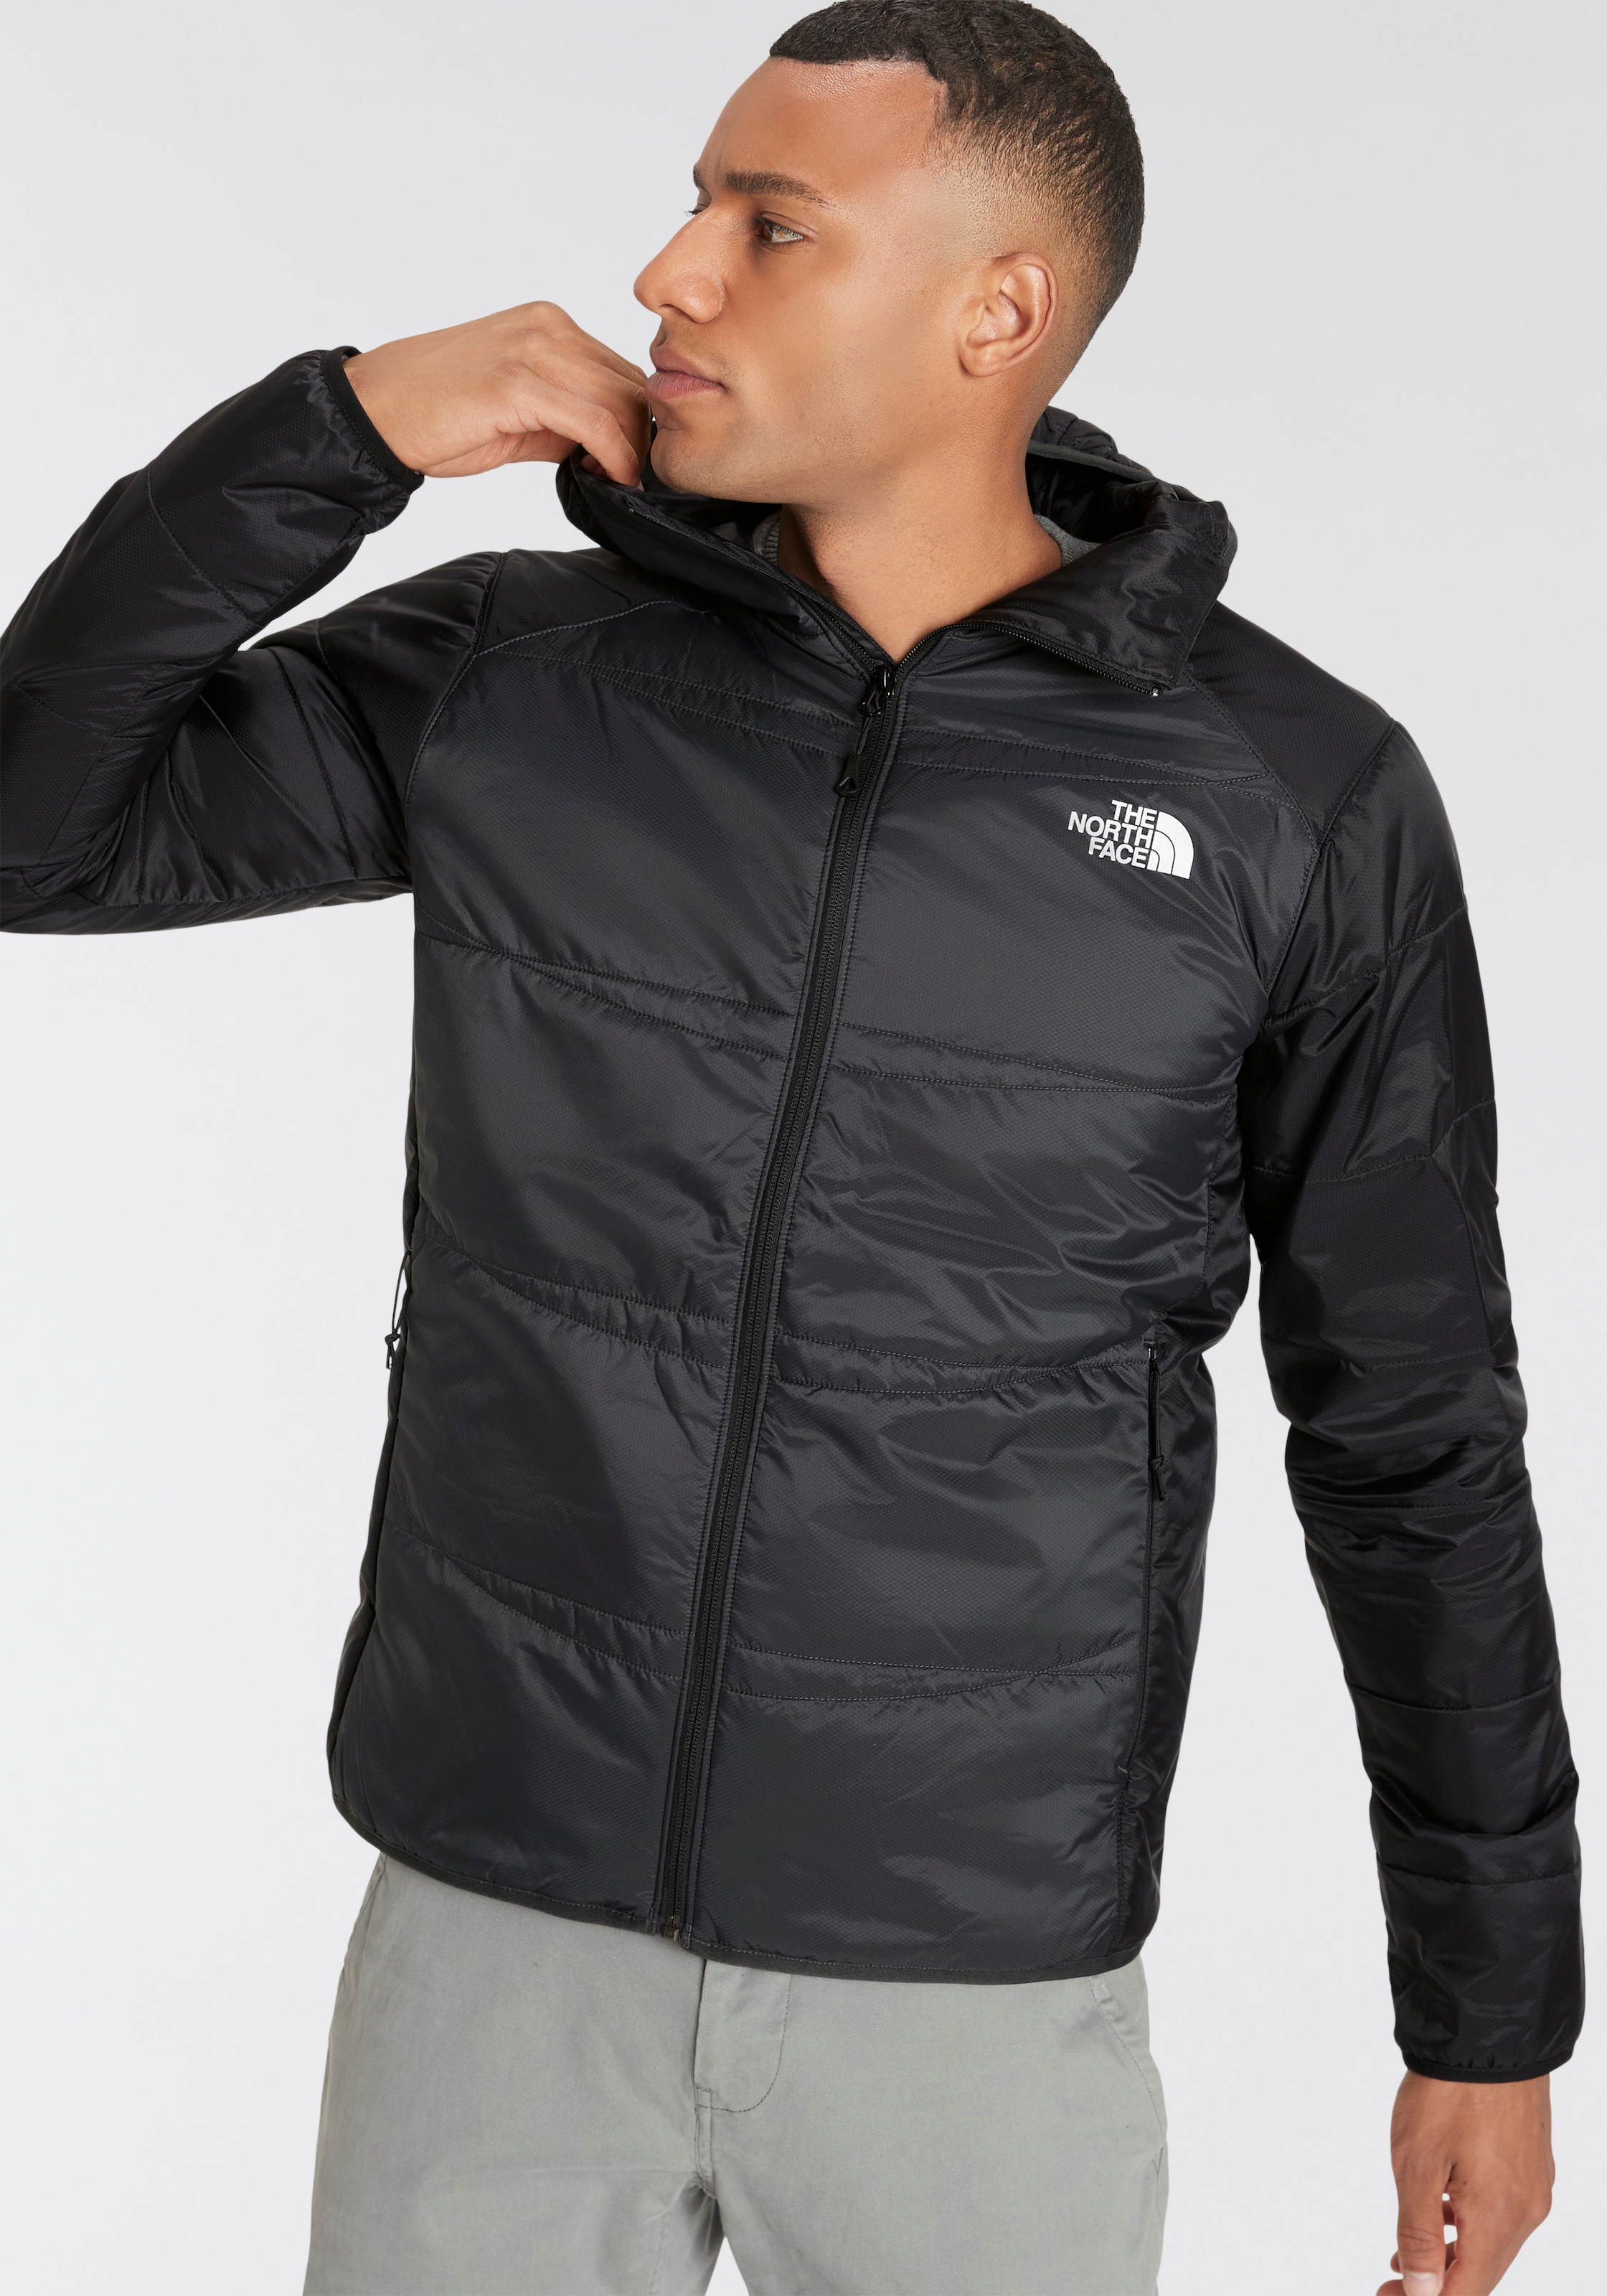 The North Face JACKET«, »M bei Funktionsjacke mit Logodruck SYNTHETIC QUEST